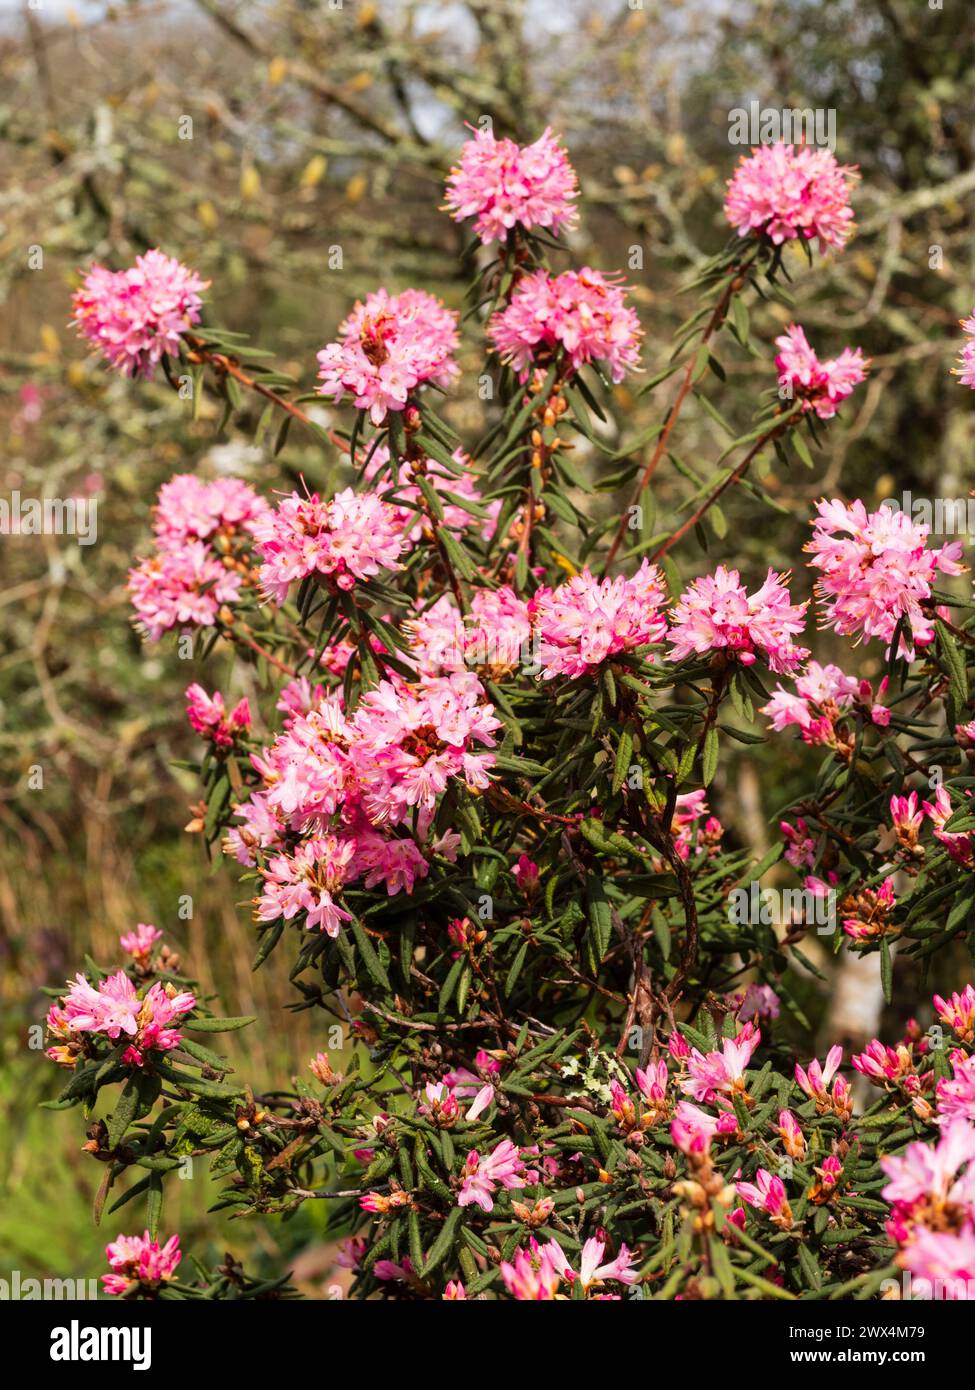 Small pink flowers of the early spring bloming hardy evergreen shrub for acid soils, Rhododendron scabrifolium var spiciferum Stock Photo